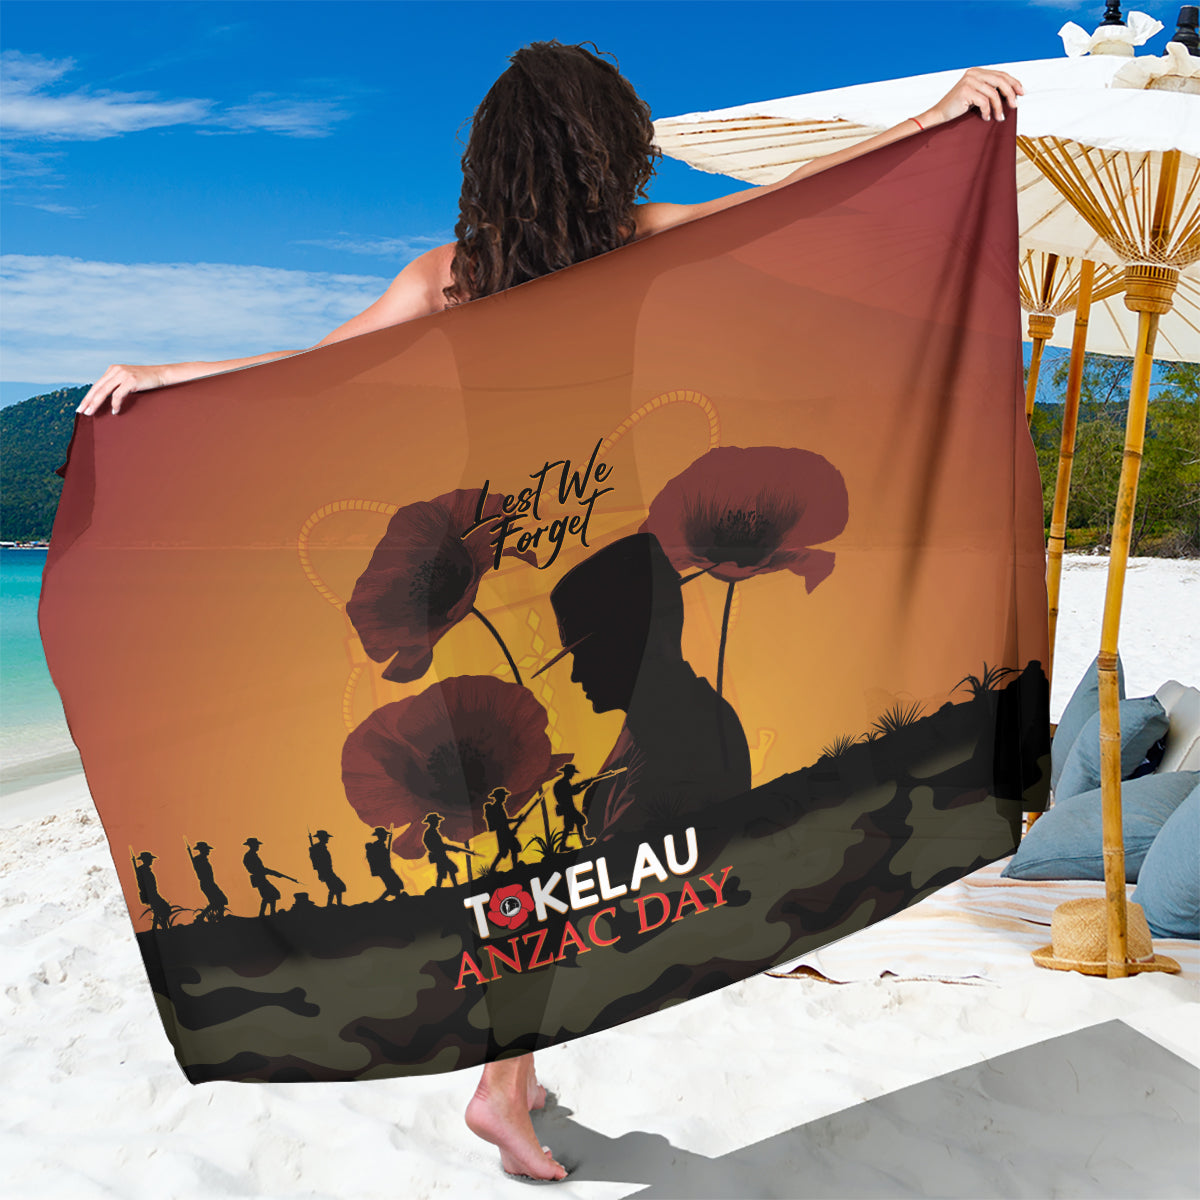 Tokelau ANZAC Day Sarong Camouflage With Poppies Lest We Forget LT14 One Size 44 x 66 inches Yellow - Polynesian Pride